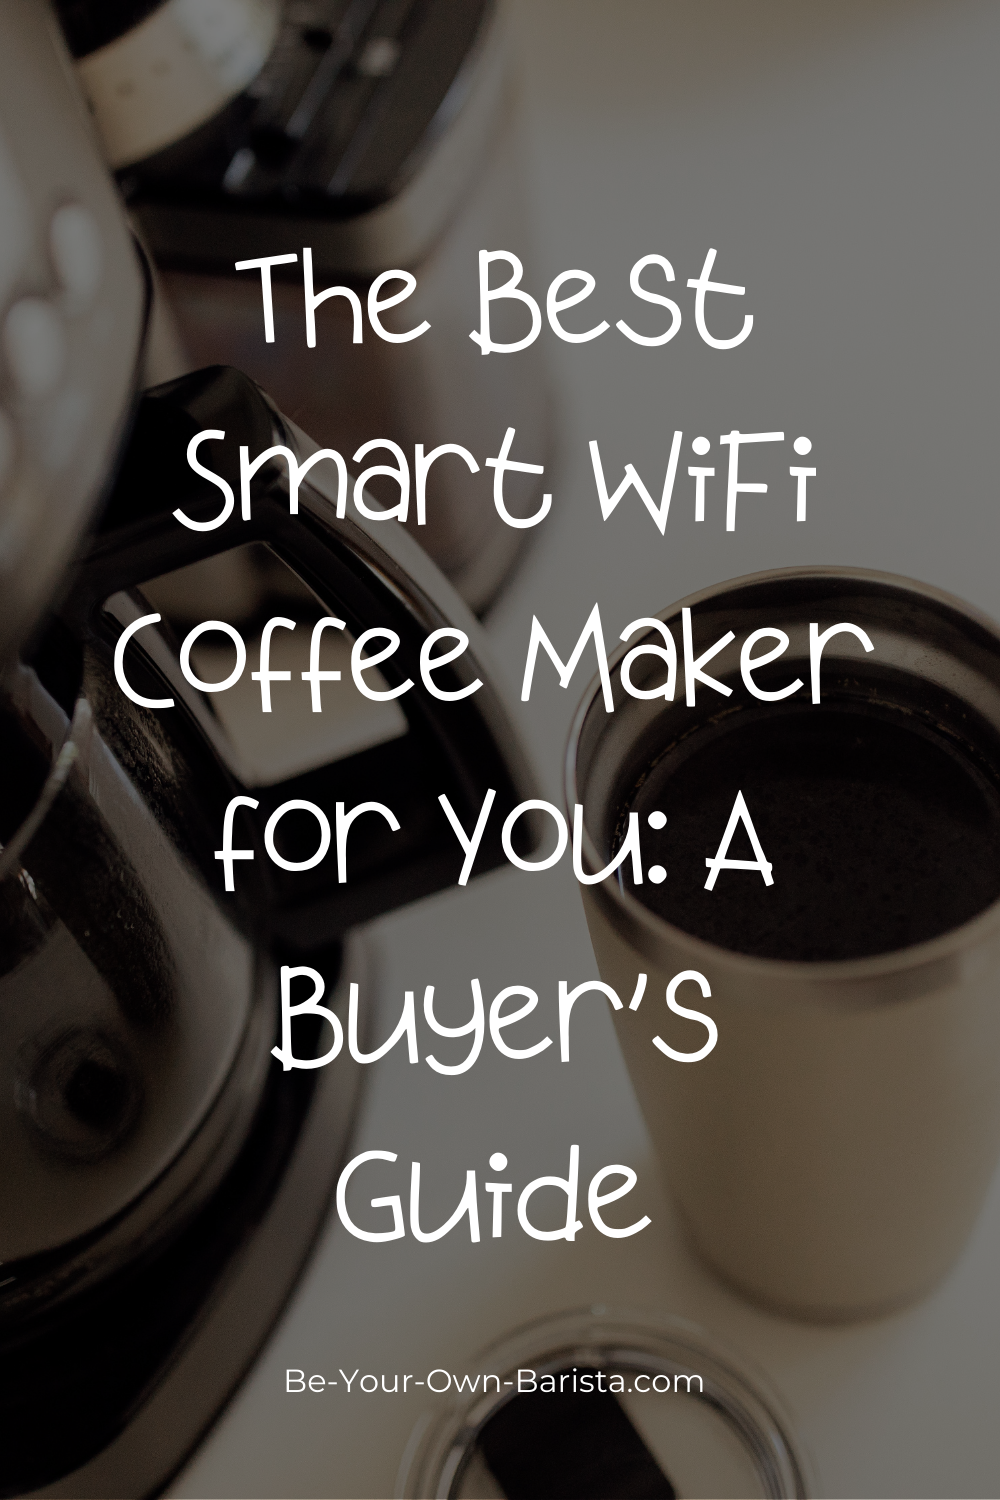 The Best Smart WiFi Coffee Maker for You A Buyer’s Guide